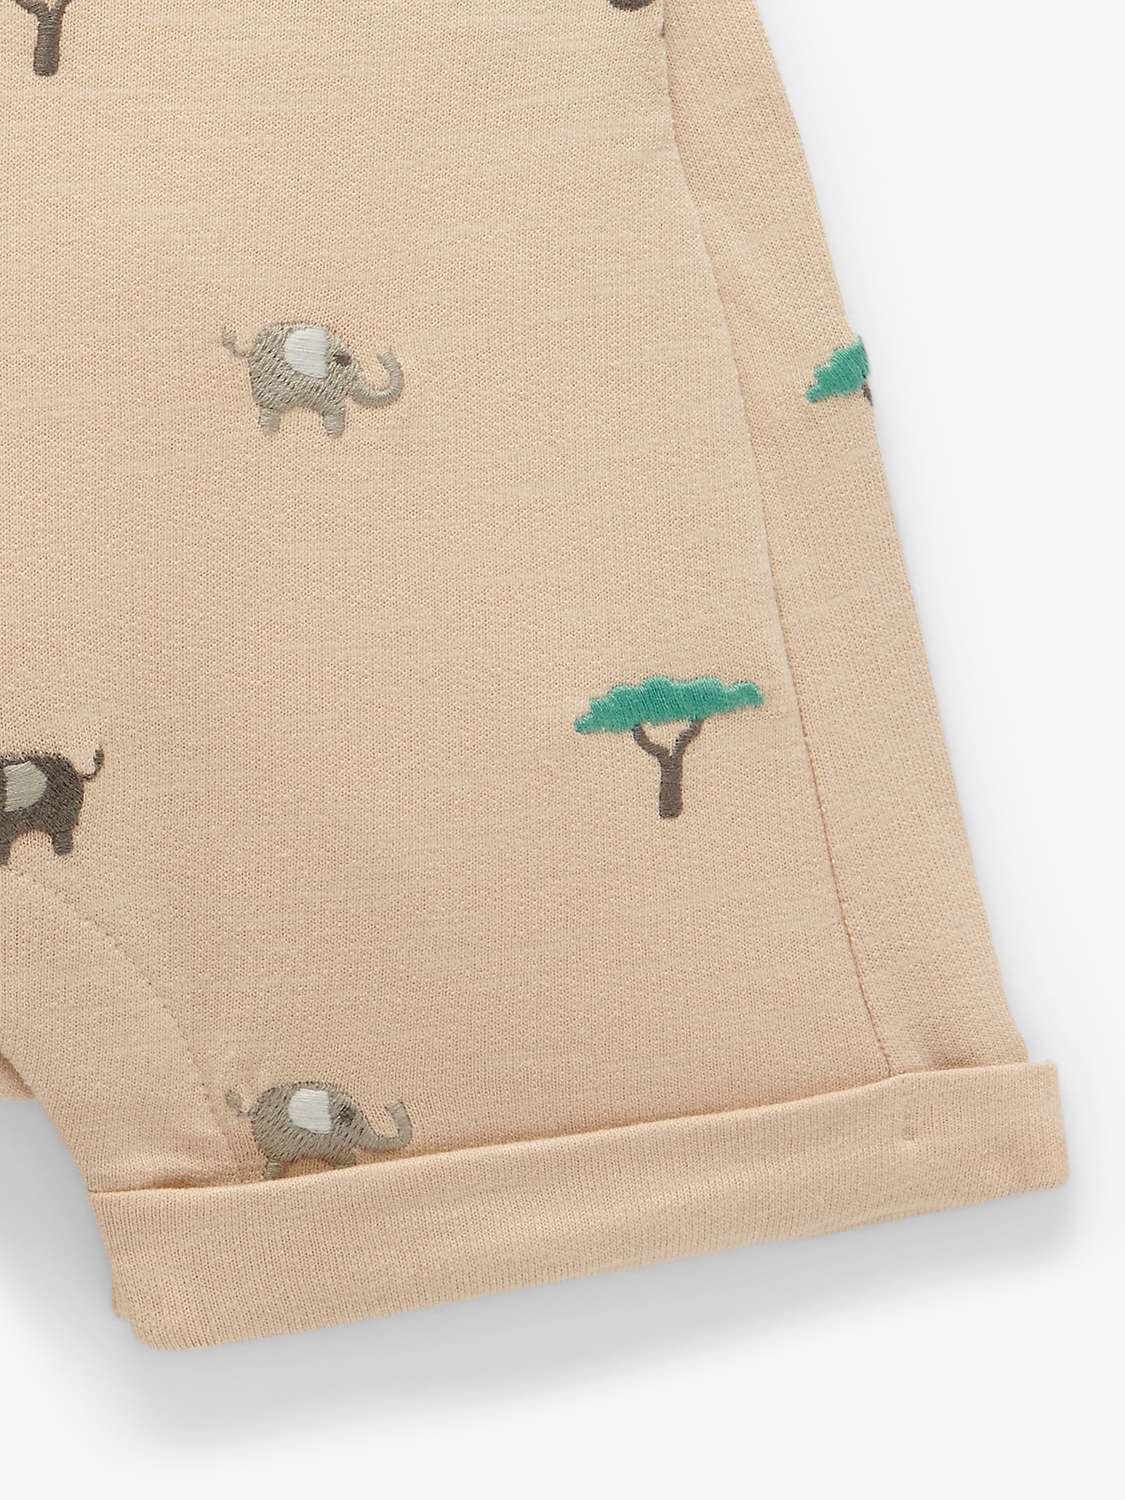 Buy Purebaby Baby Organic Cotton Embroided Romper, Neutrals/Multi Online at johnlewis.com